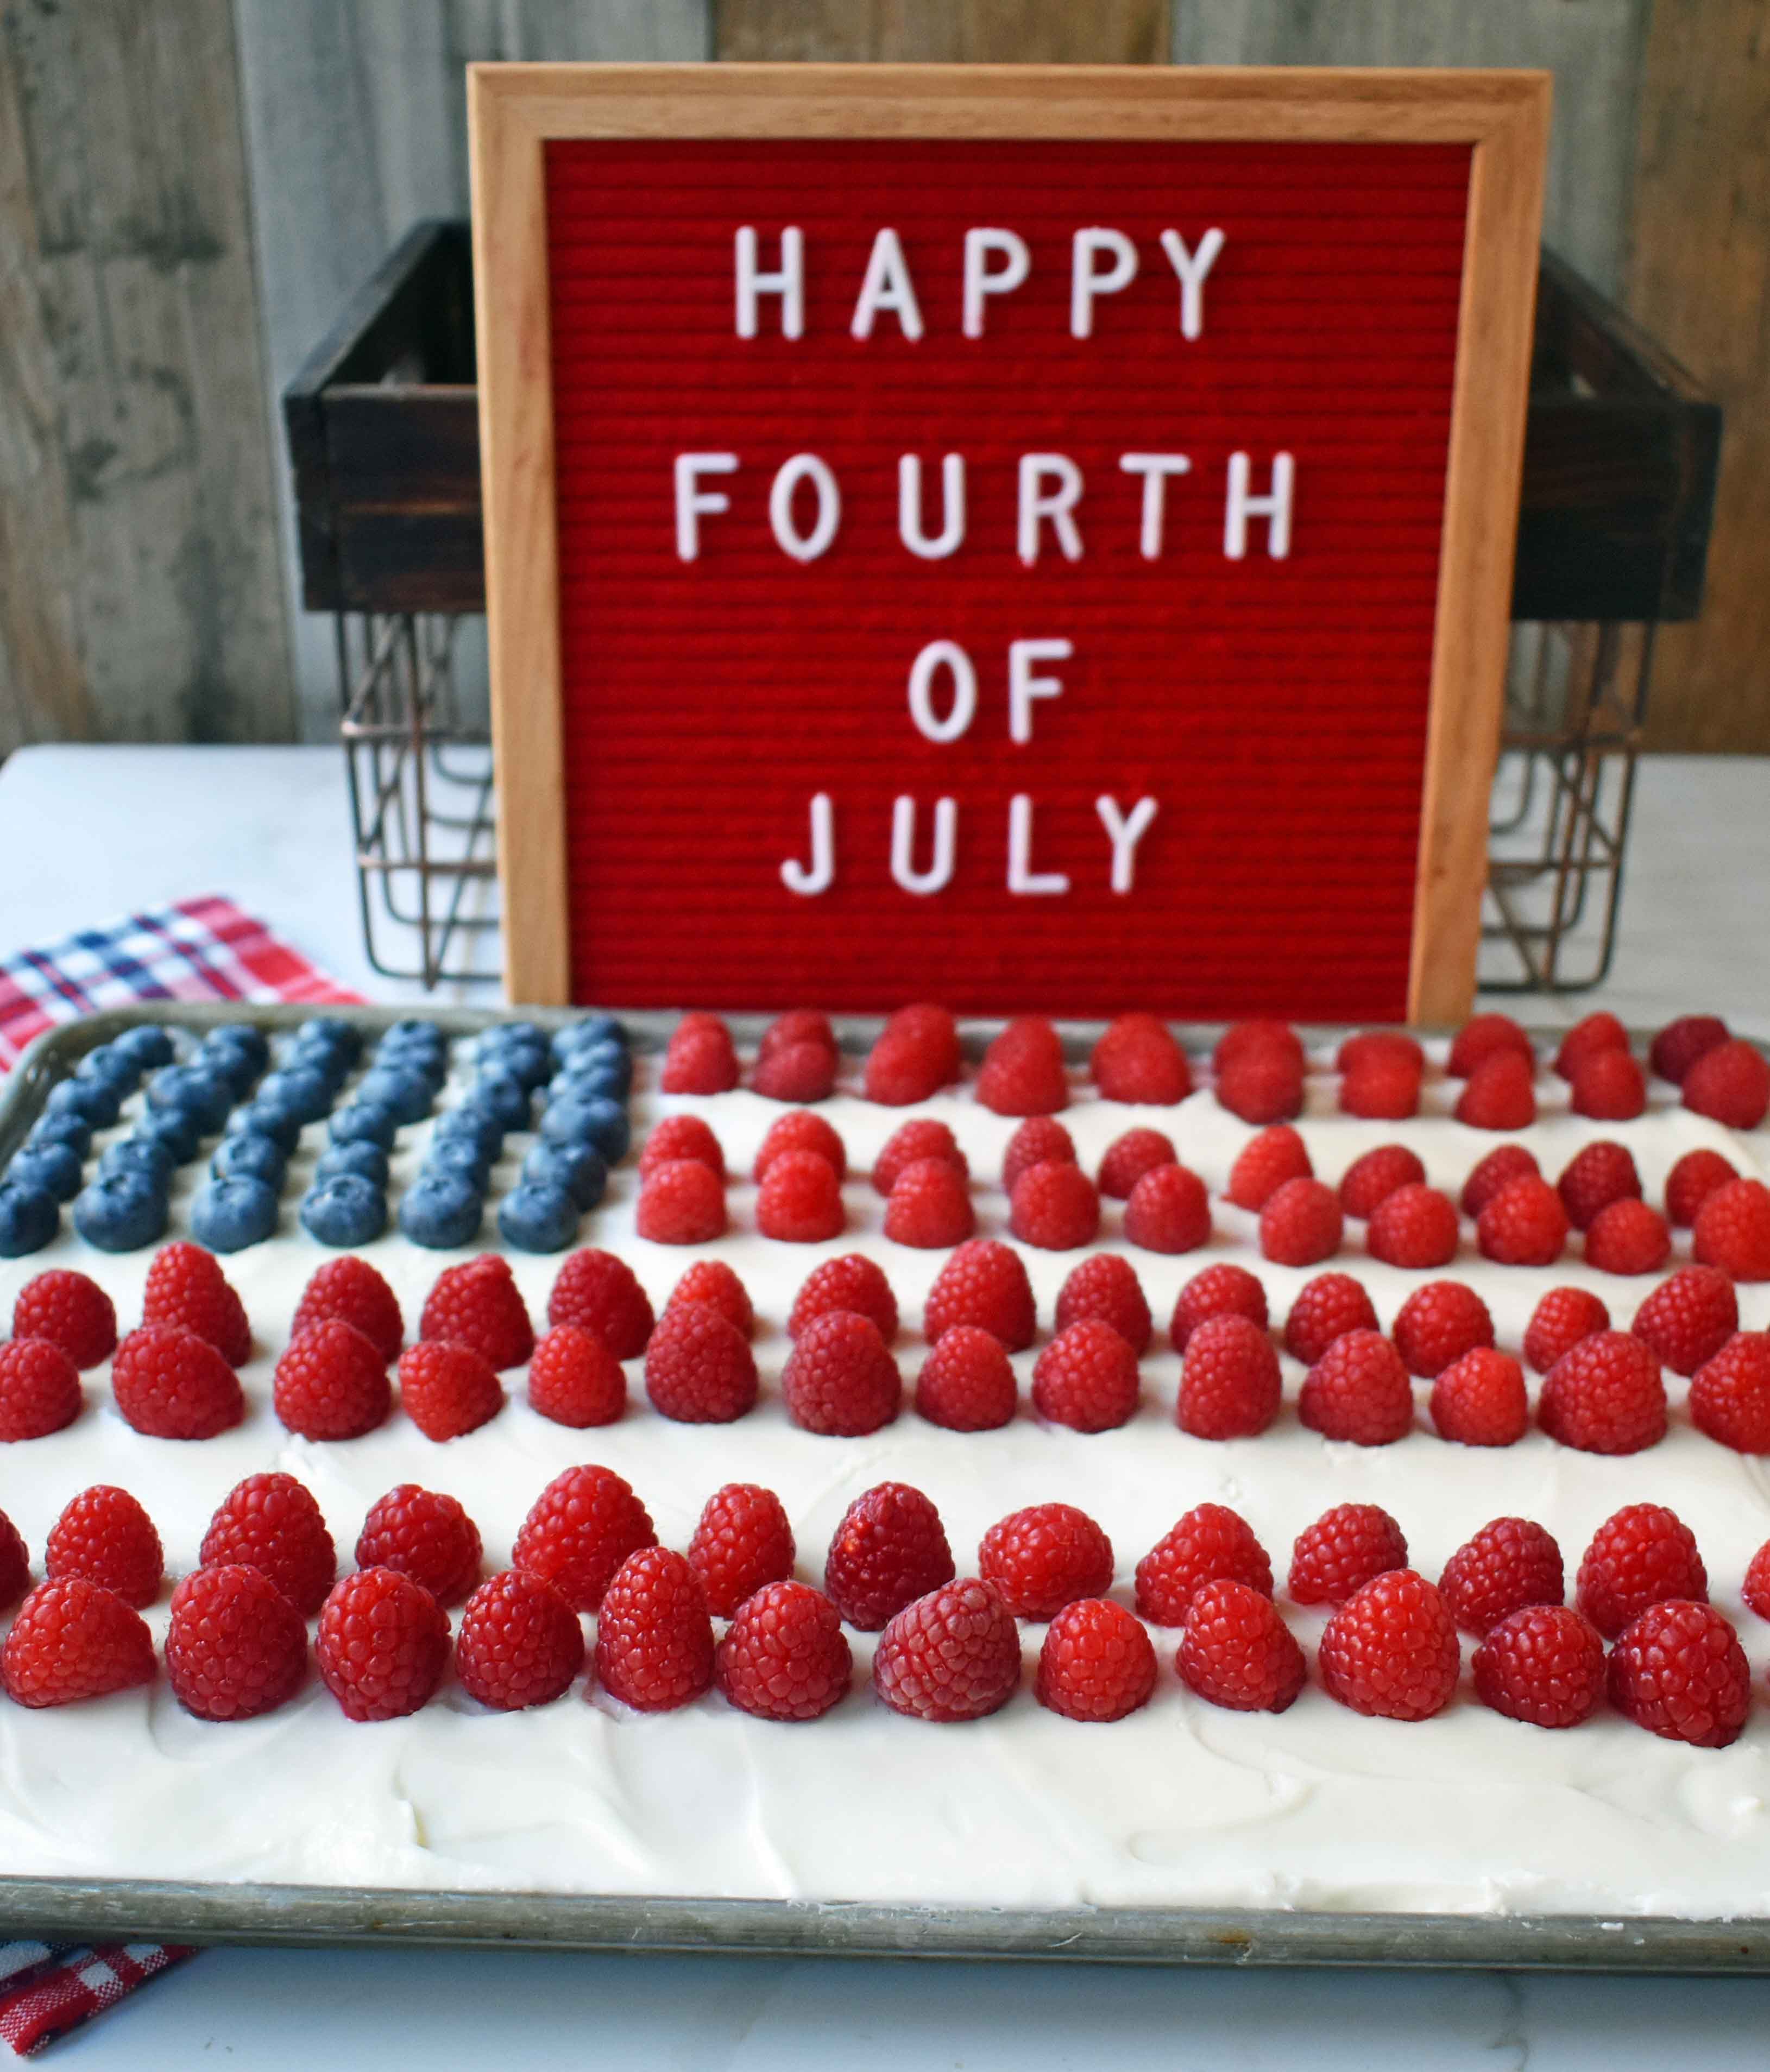 Vanilla Almond White Texas Sheet Cake. A vanilla white cake poured to a jelly roll pan and baked until moist and tender. Topped with almond cream cheese frosting and fresh berries. Perfect flag cake for a 4th of July celebration. www.modernhoney.com